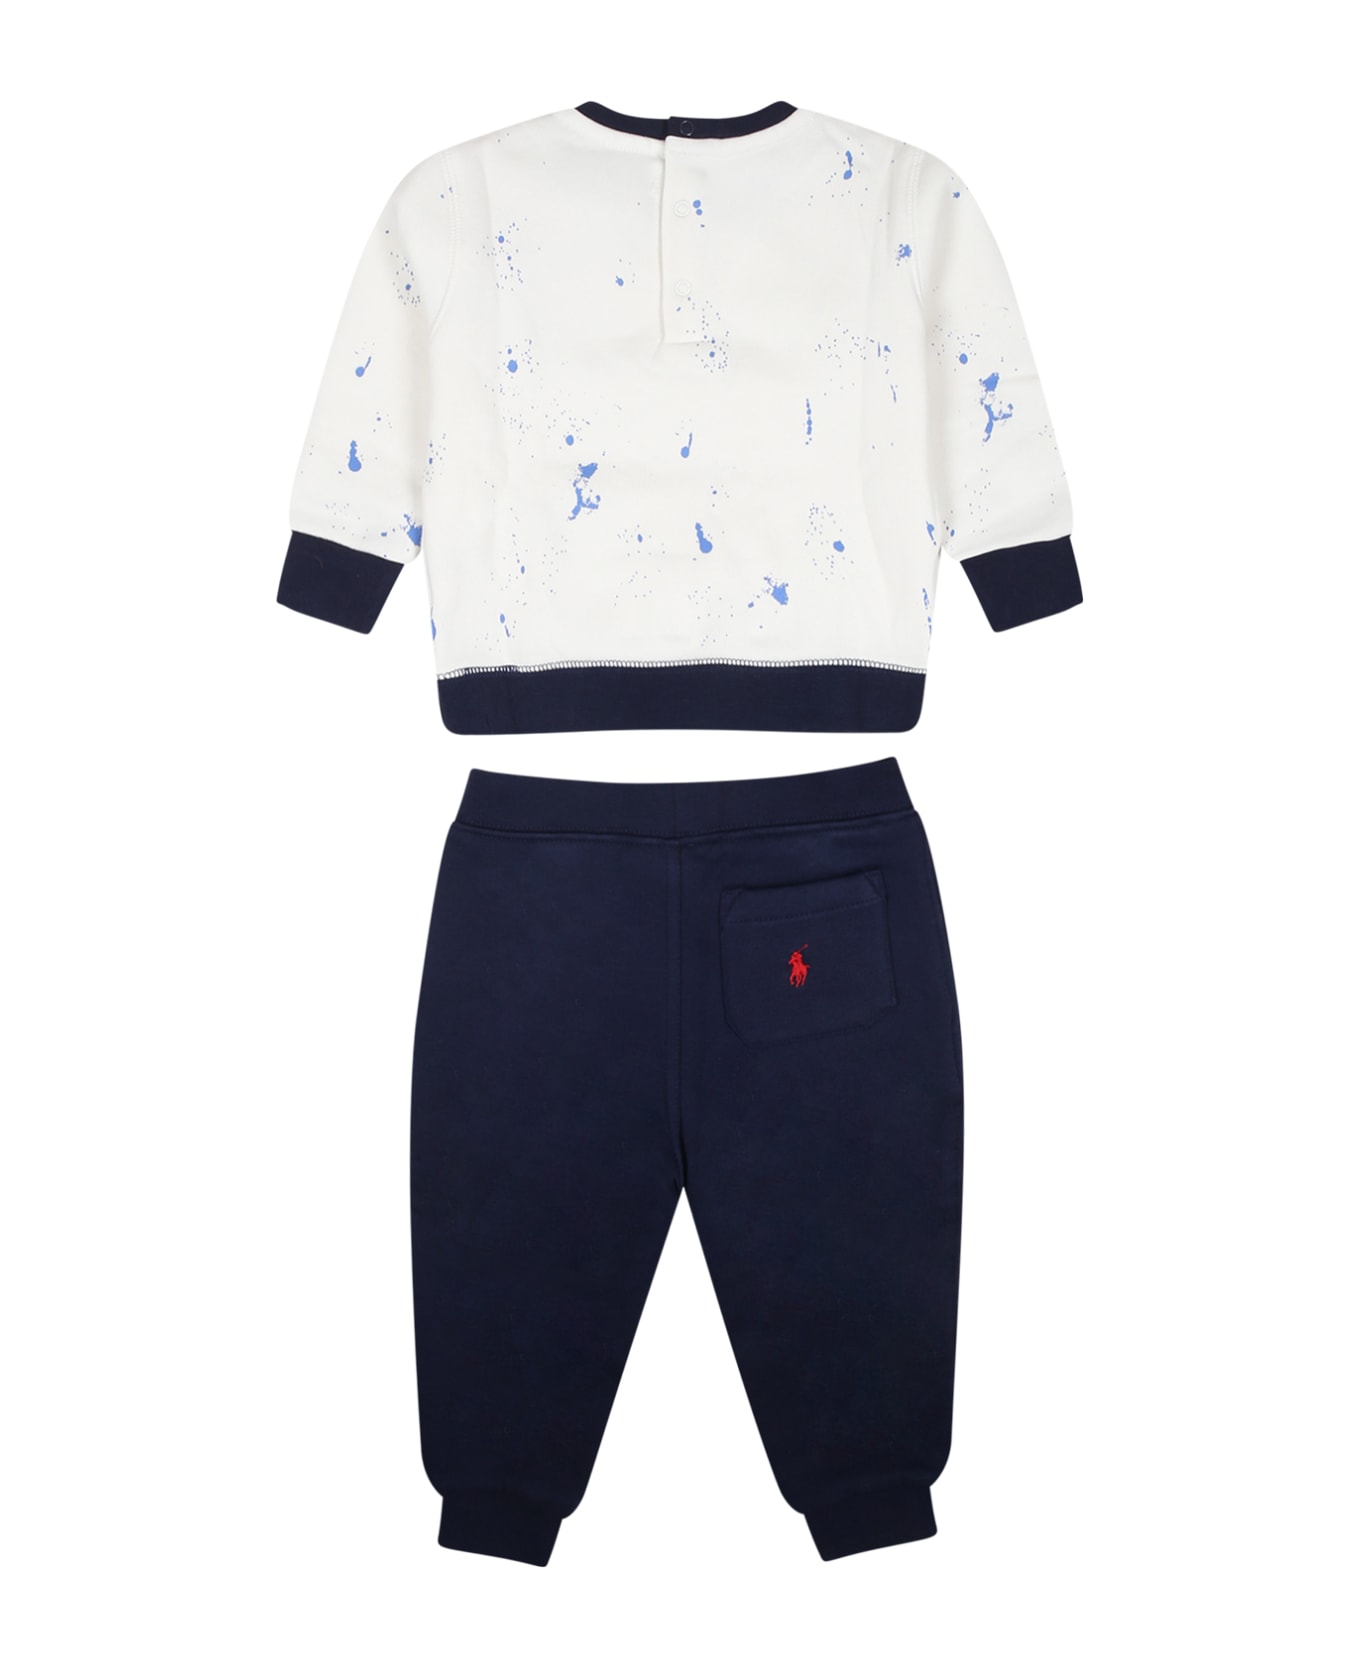 Ralph Lauren Blue Suit For Baby Boy With Polo Bear - Multicolor ボトムス